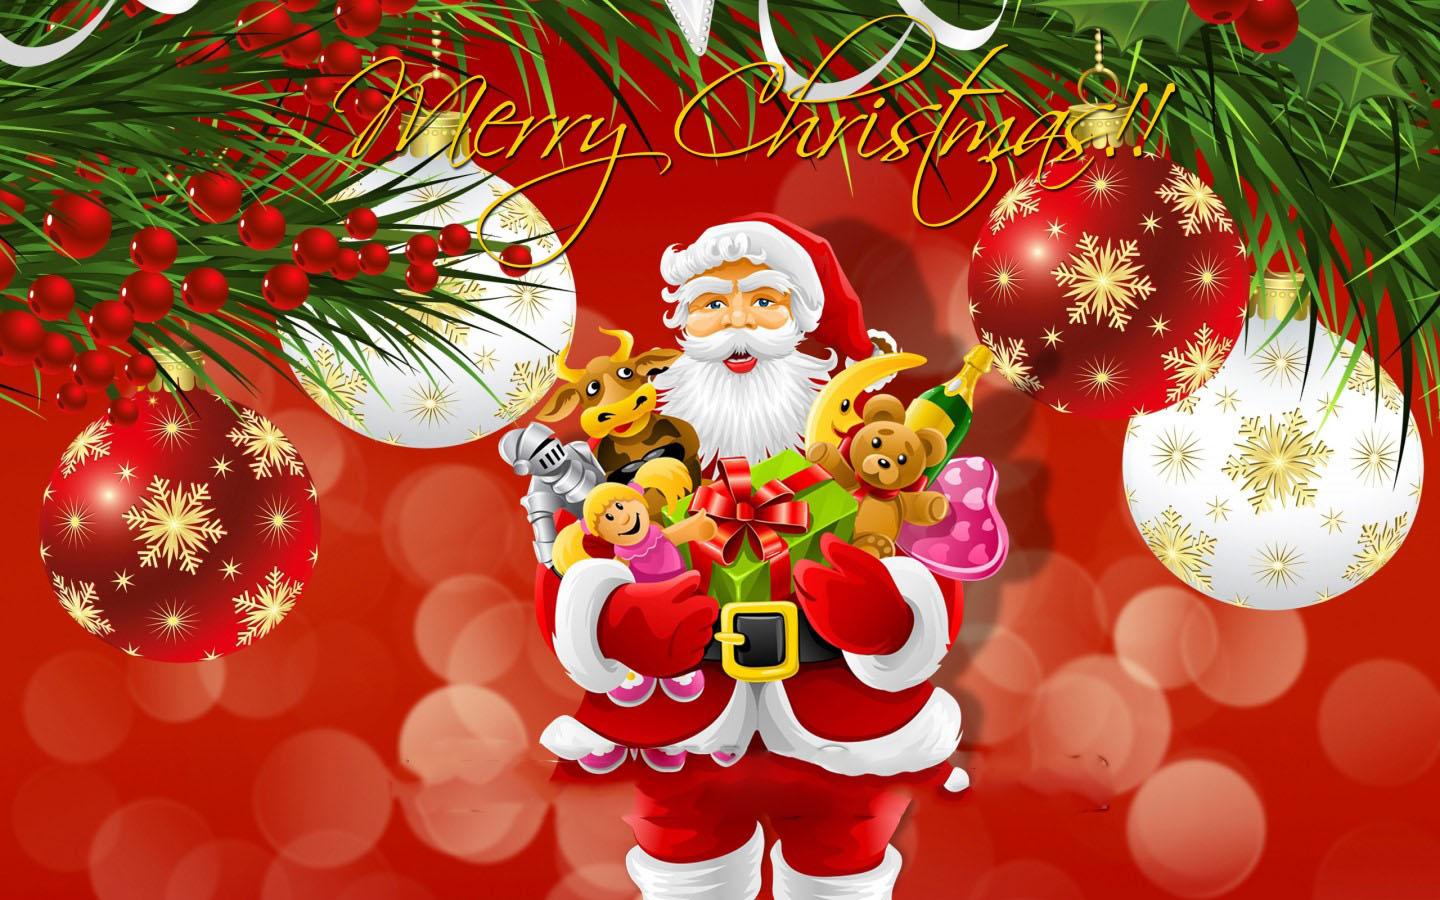 Merry Christmas Wallpaper Android Apps On Google Play